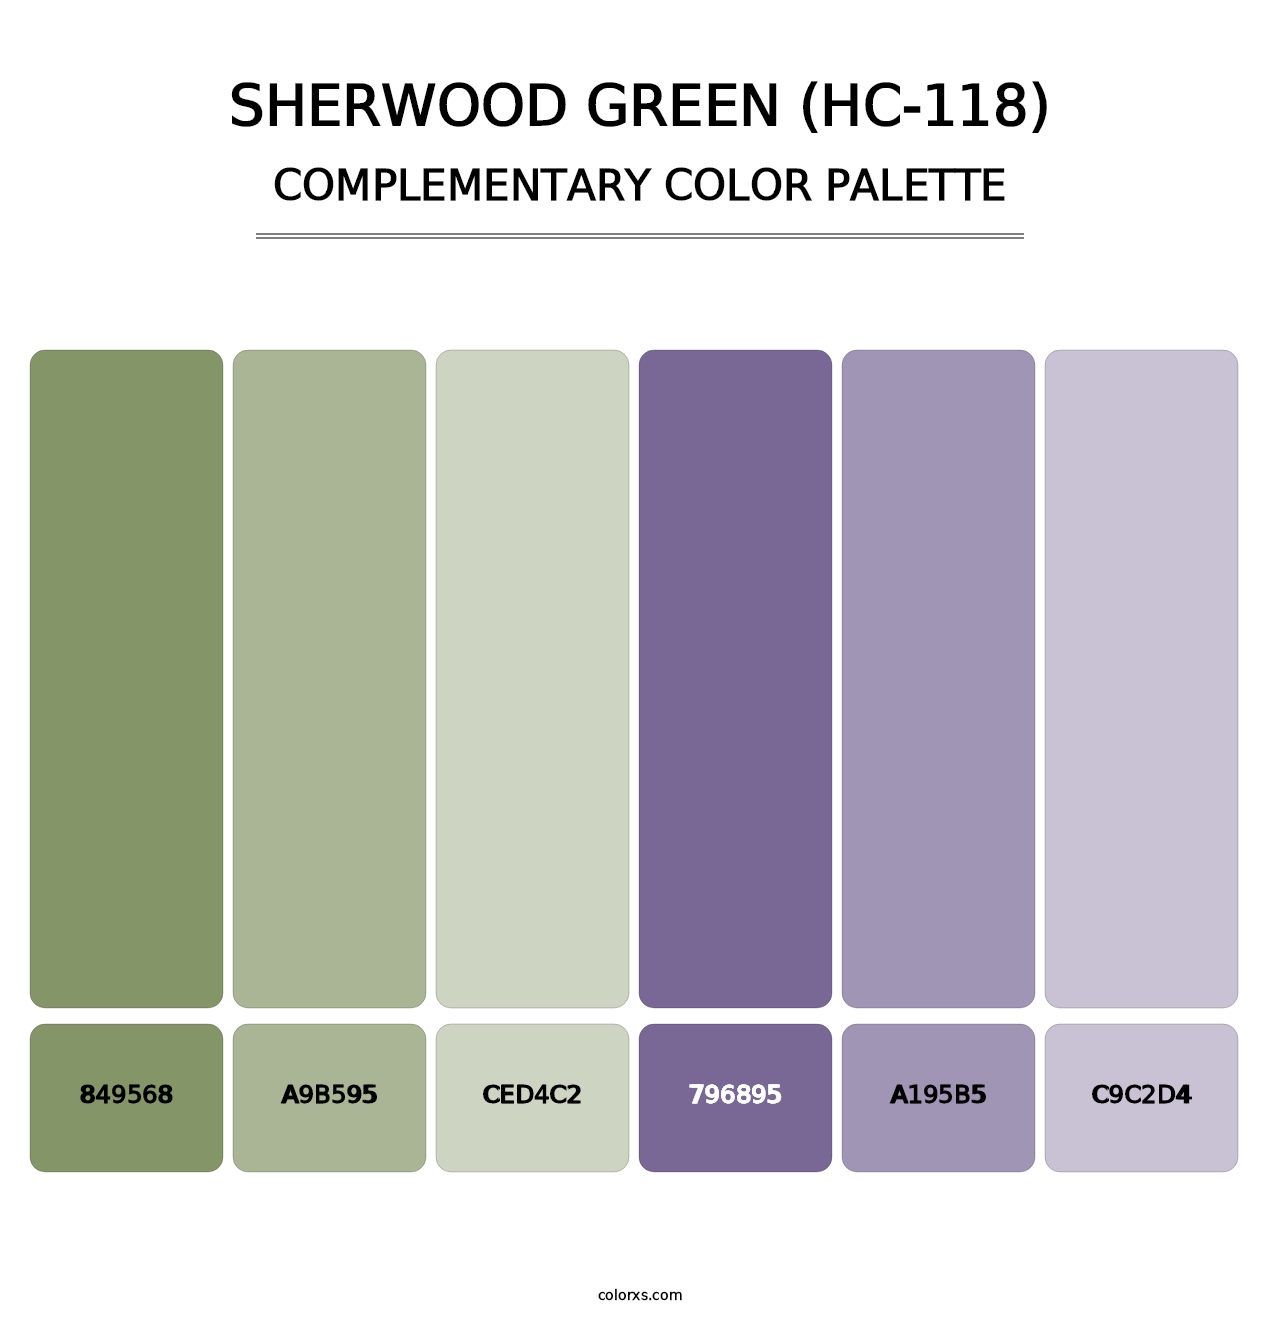 Sherwood Green (HC-118) - Complementary Color Palette